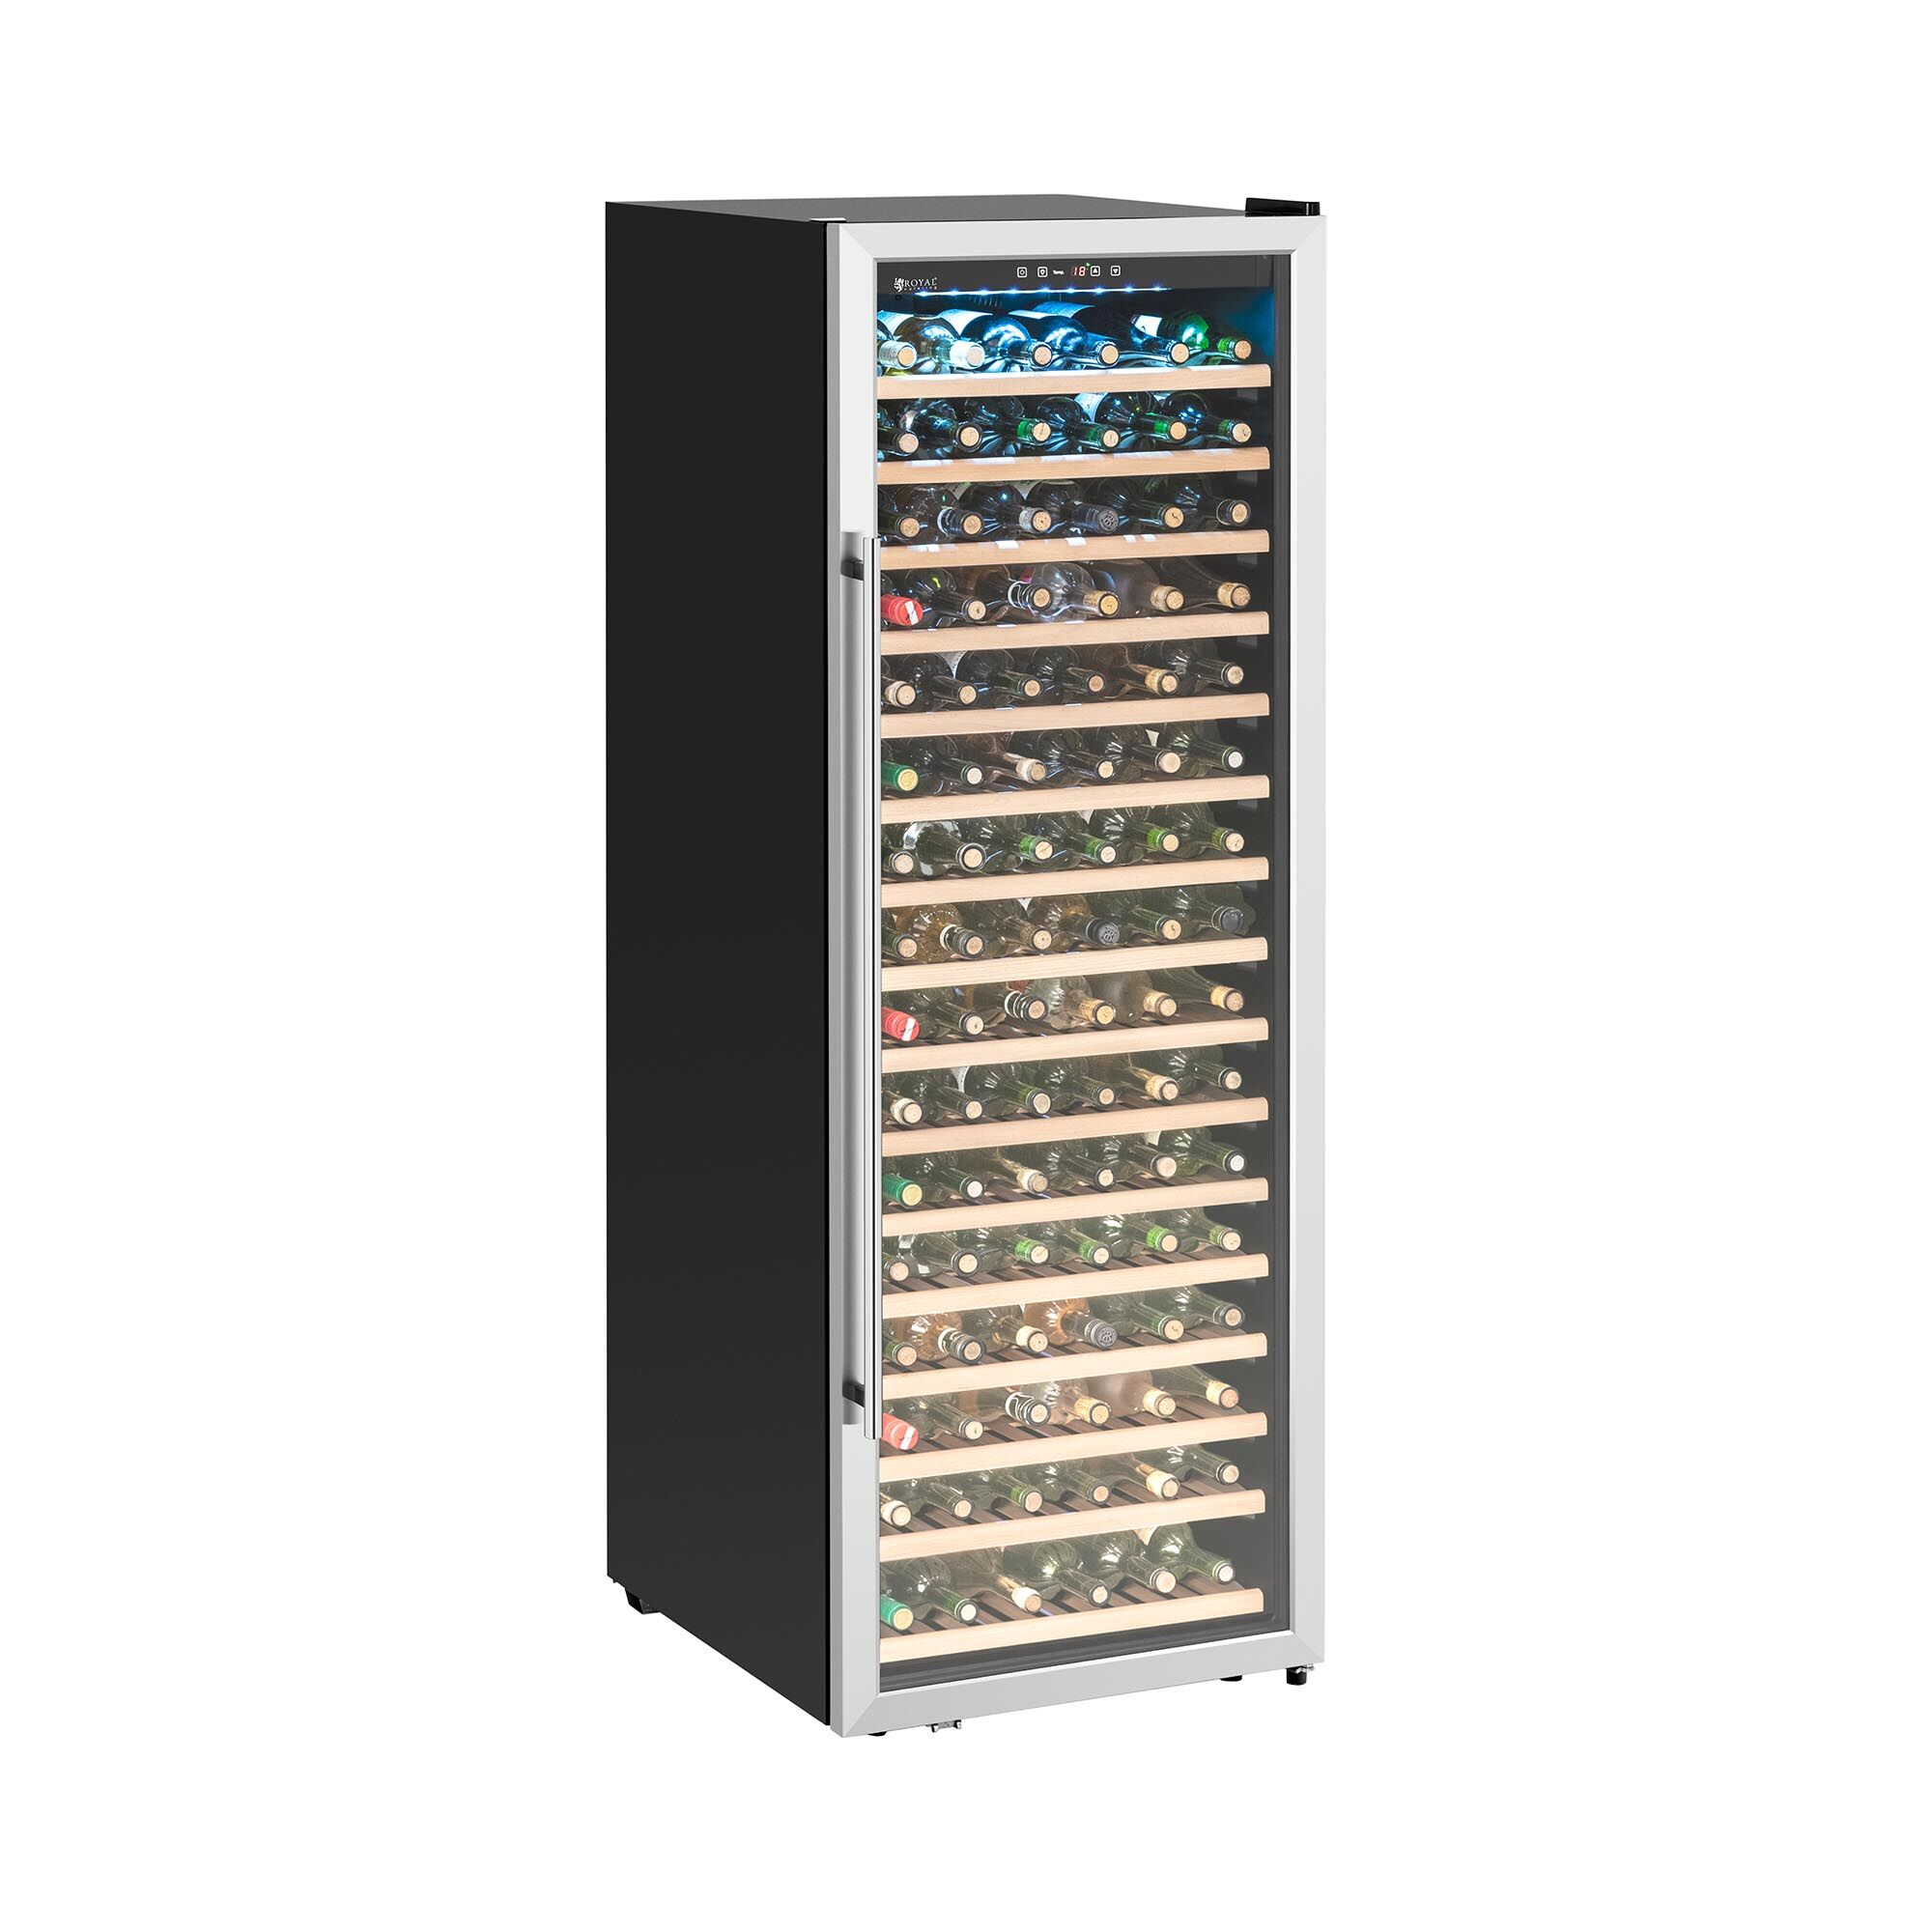 Royal Catering Beverage Cooler - 428 L - Royal Catering - powder-coated steel